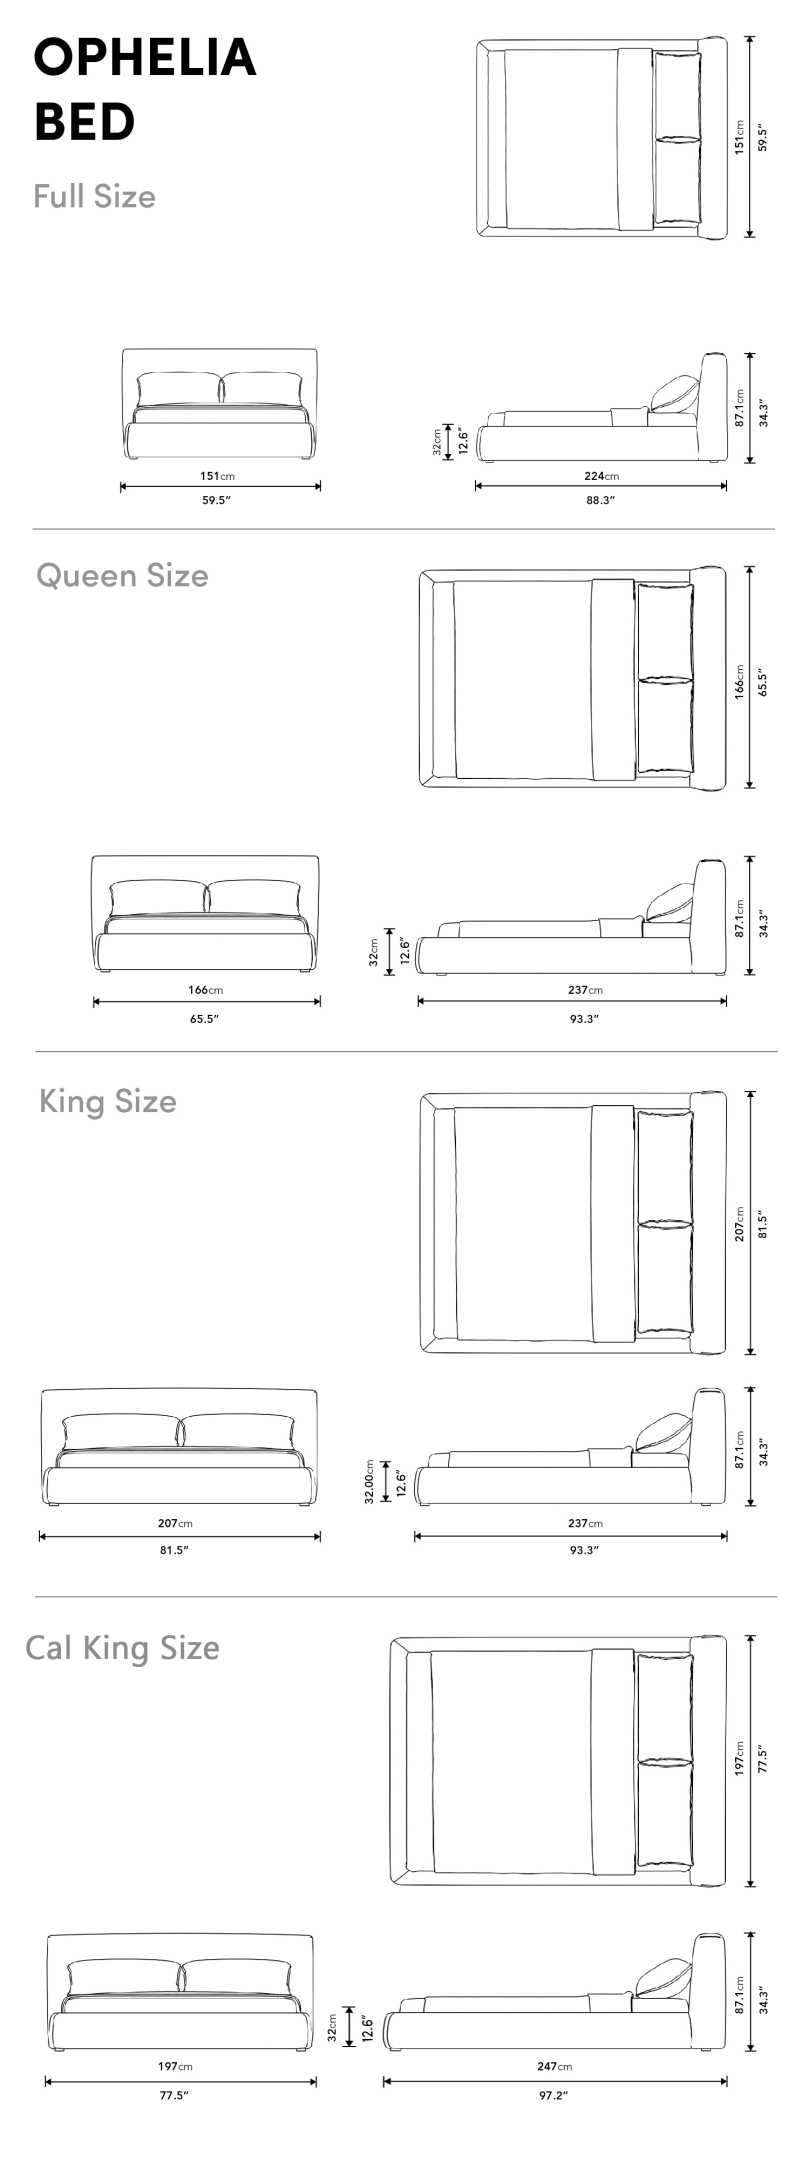 Dimensions for Ophelia Bed - Clearance